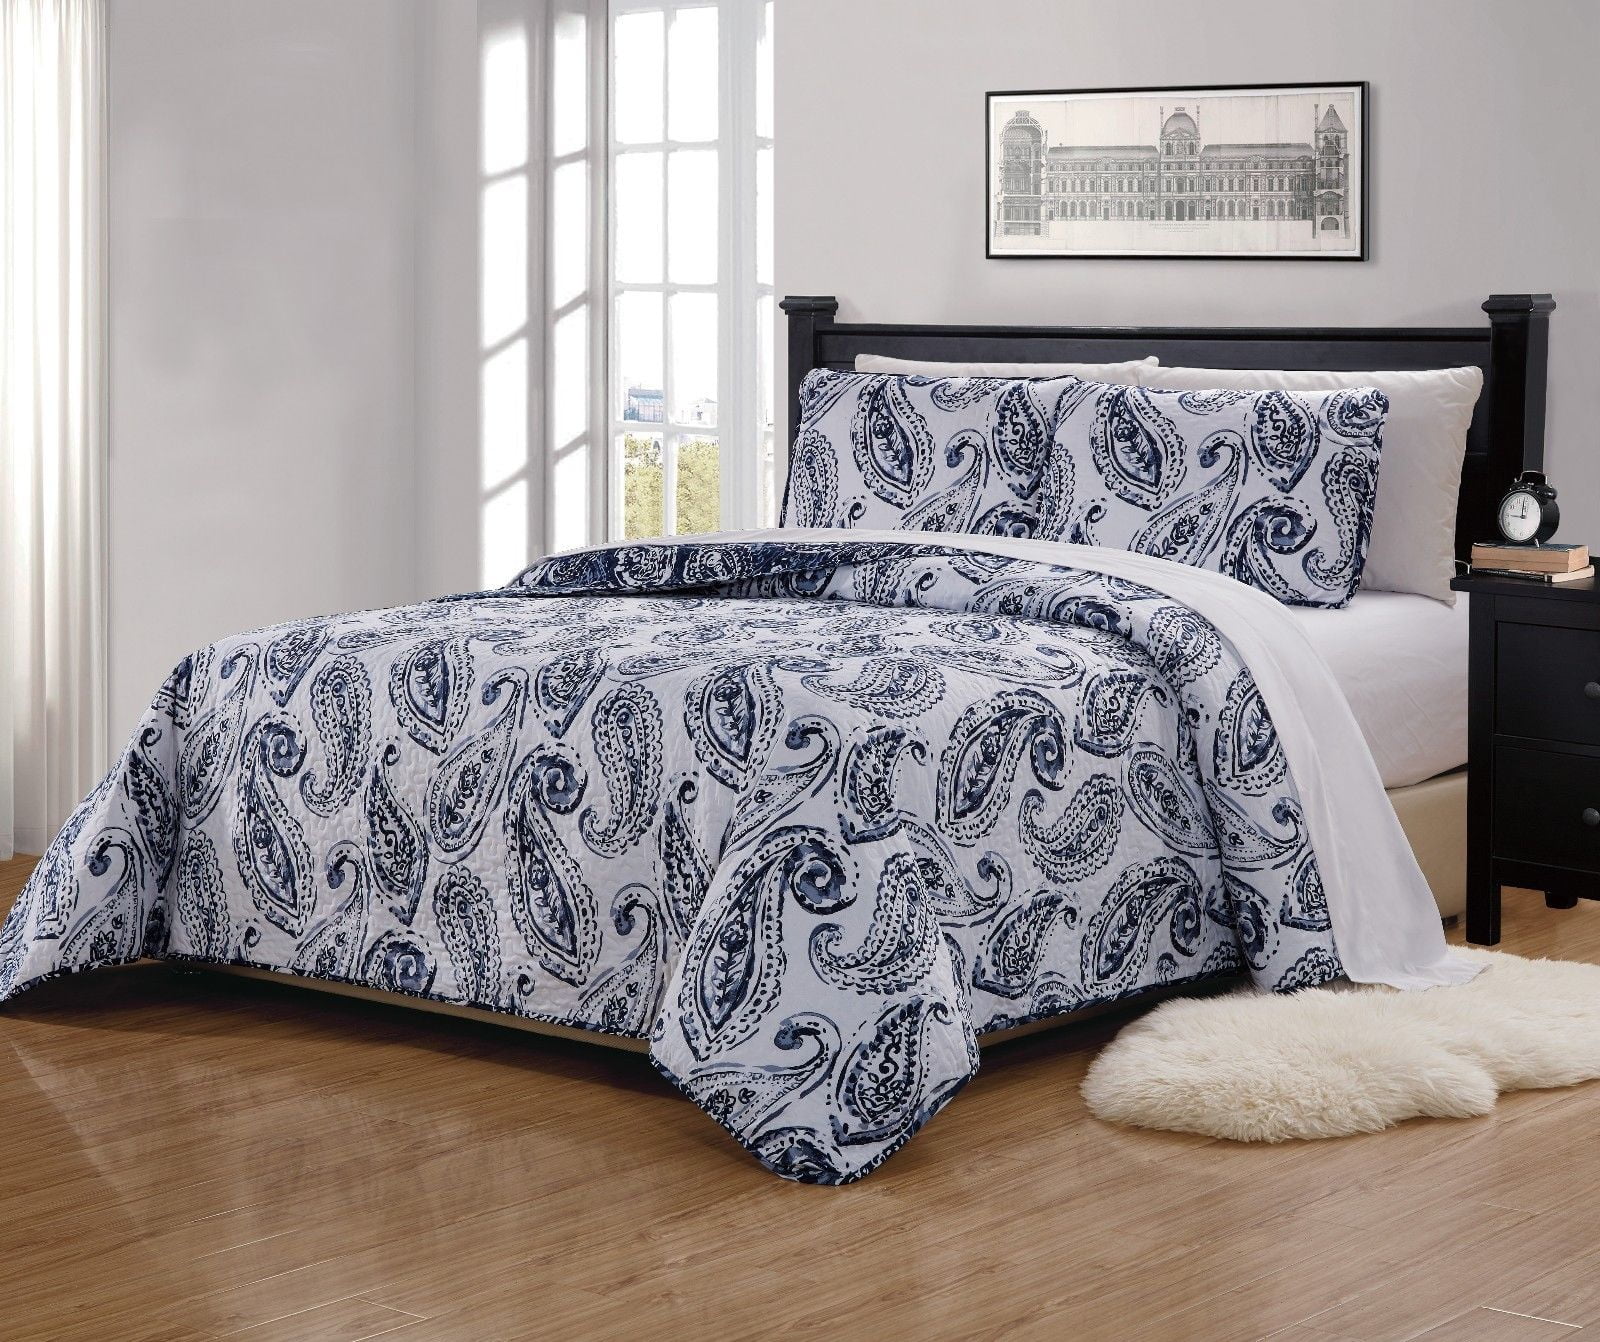 Fancy Collection 3 Pc Full/Queen Quilted Bedspread Floral Print Paisley Flower Navy Blue White Reversible Over Size New